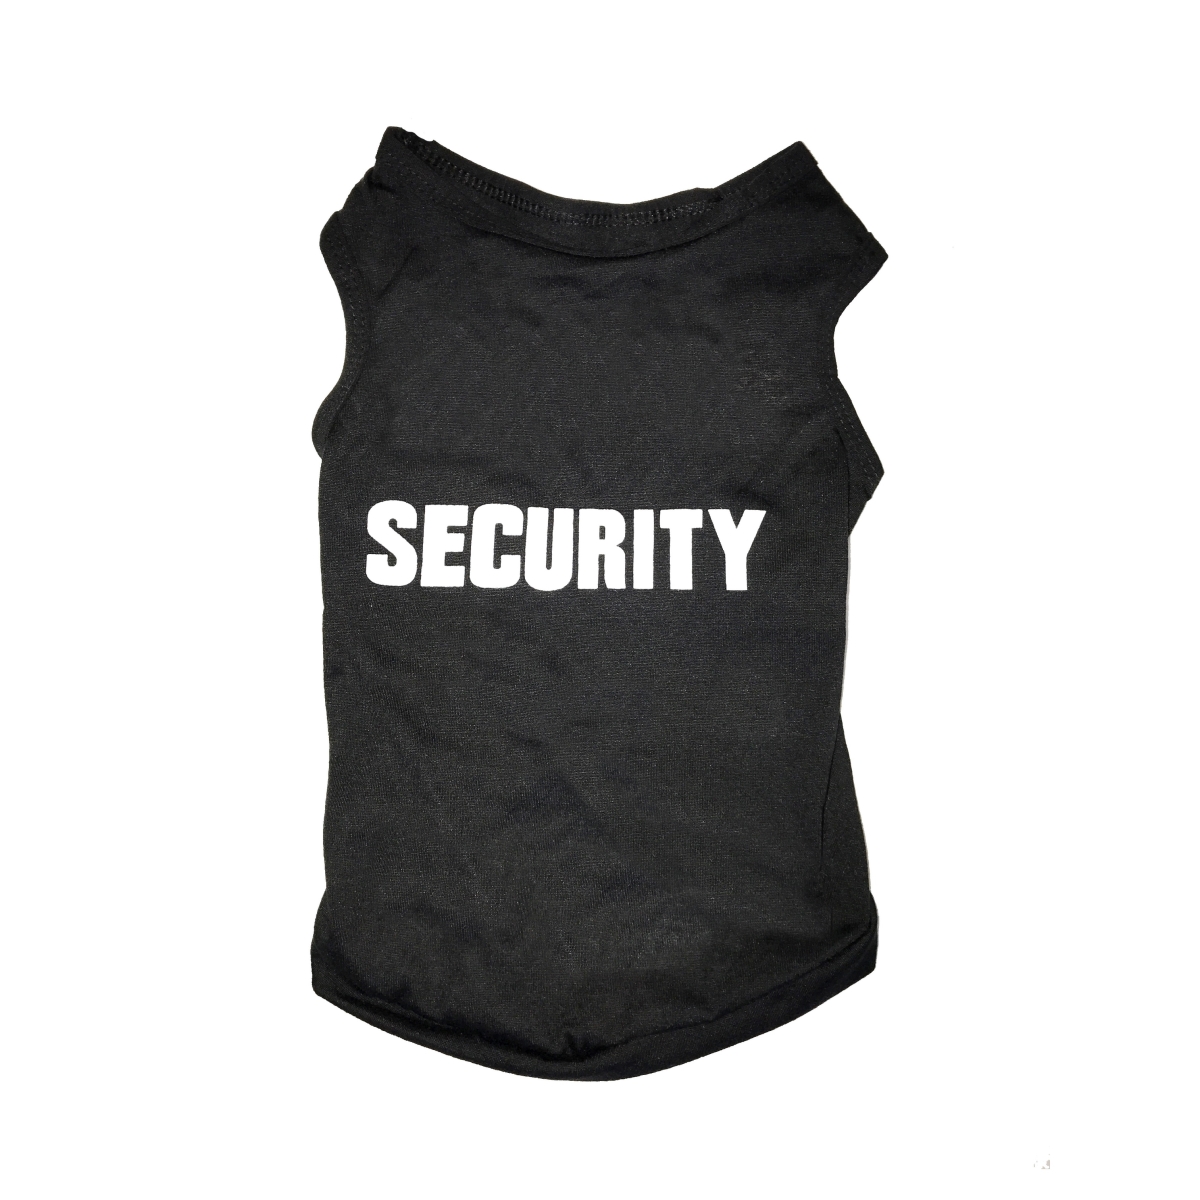 Dgsect-l Security Tee, Black - Large